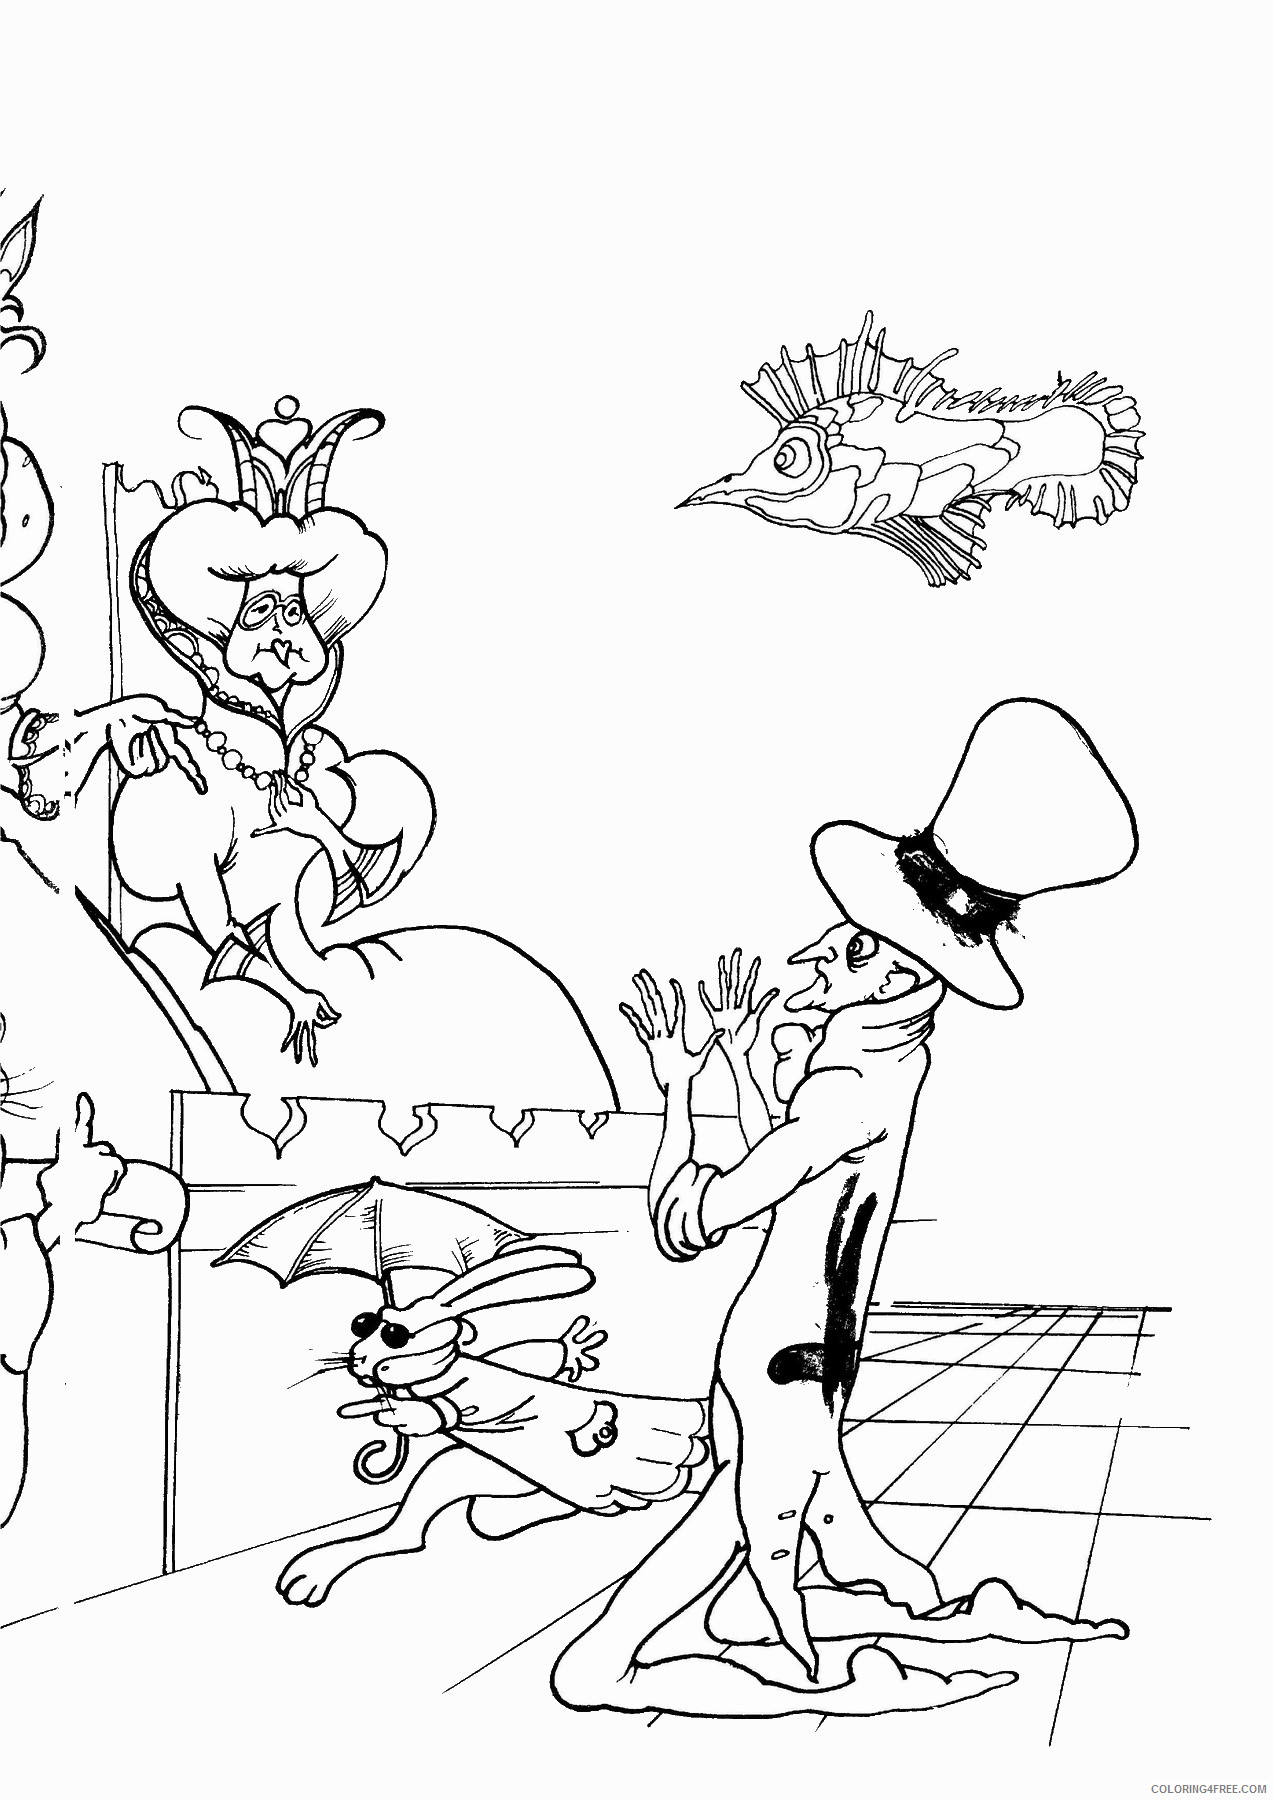 Alice in Wonderland Coloring Pages Cartoons alice_74 Printable 2020 0366 Coloring4free